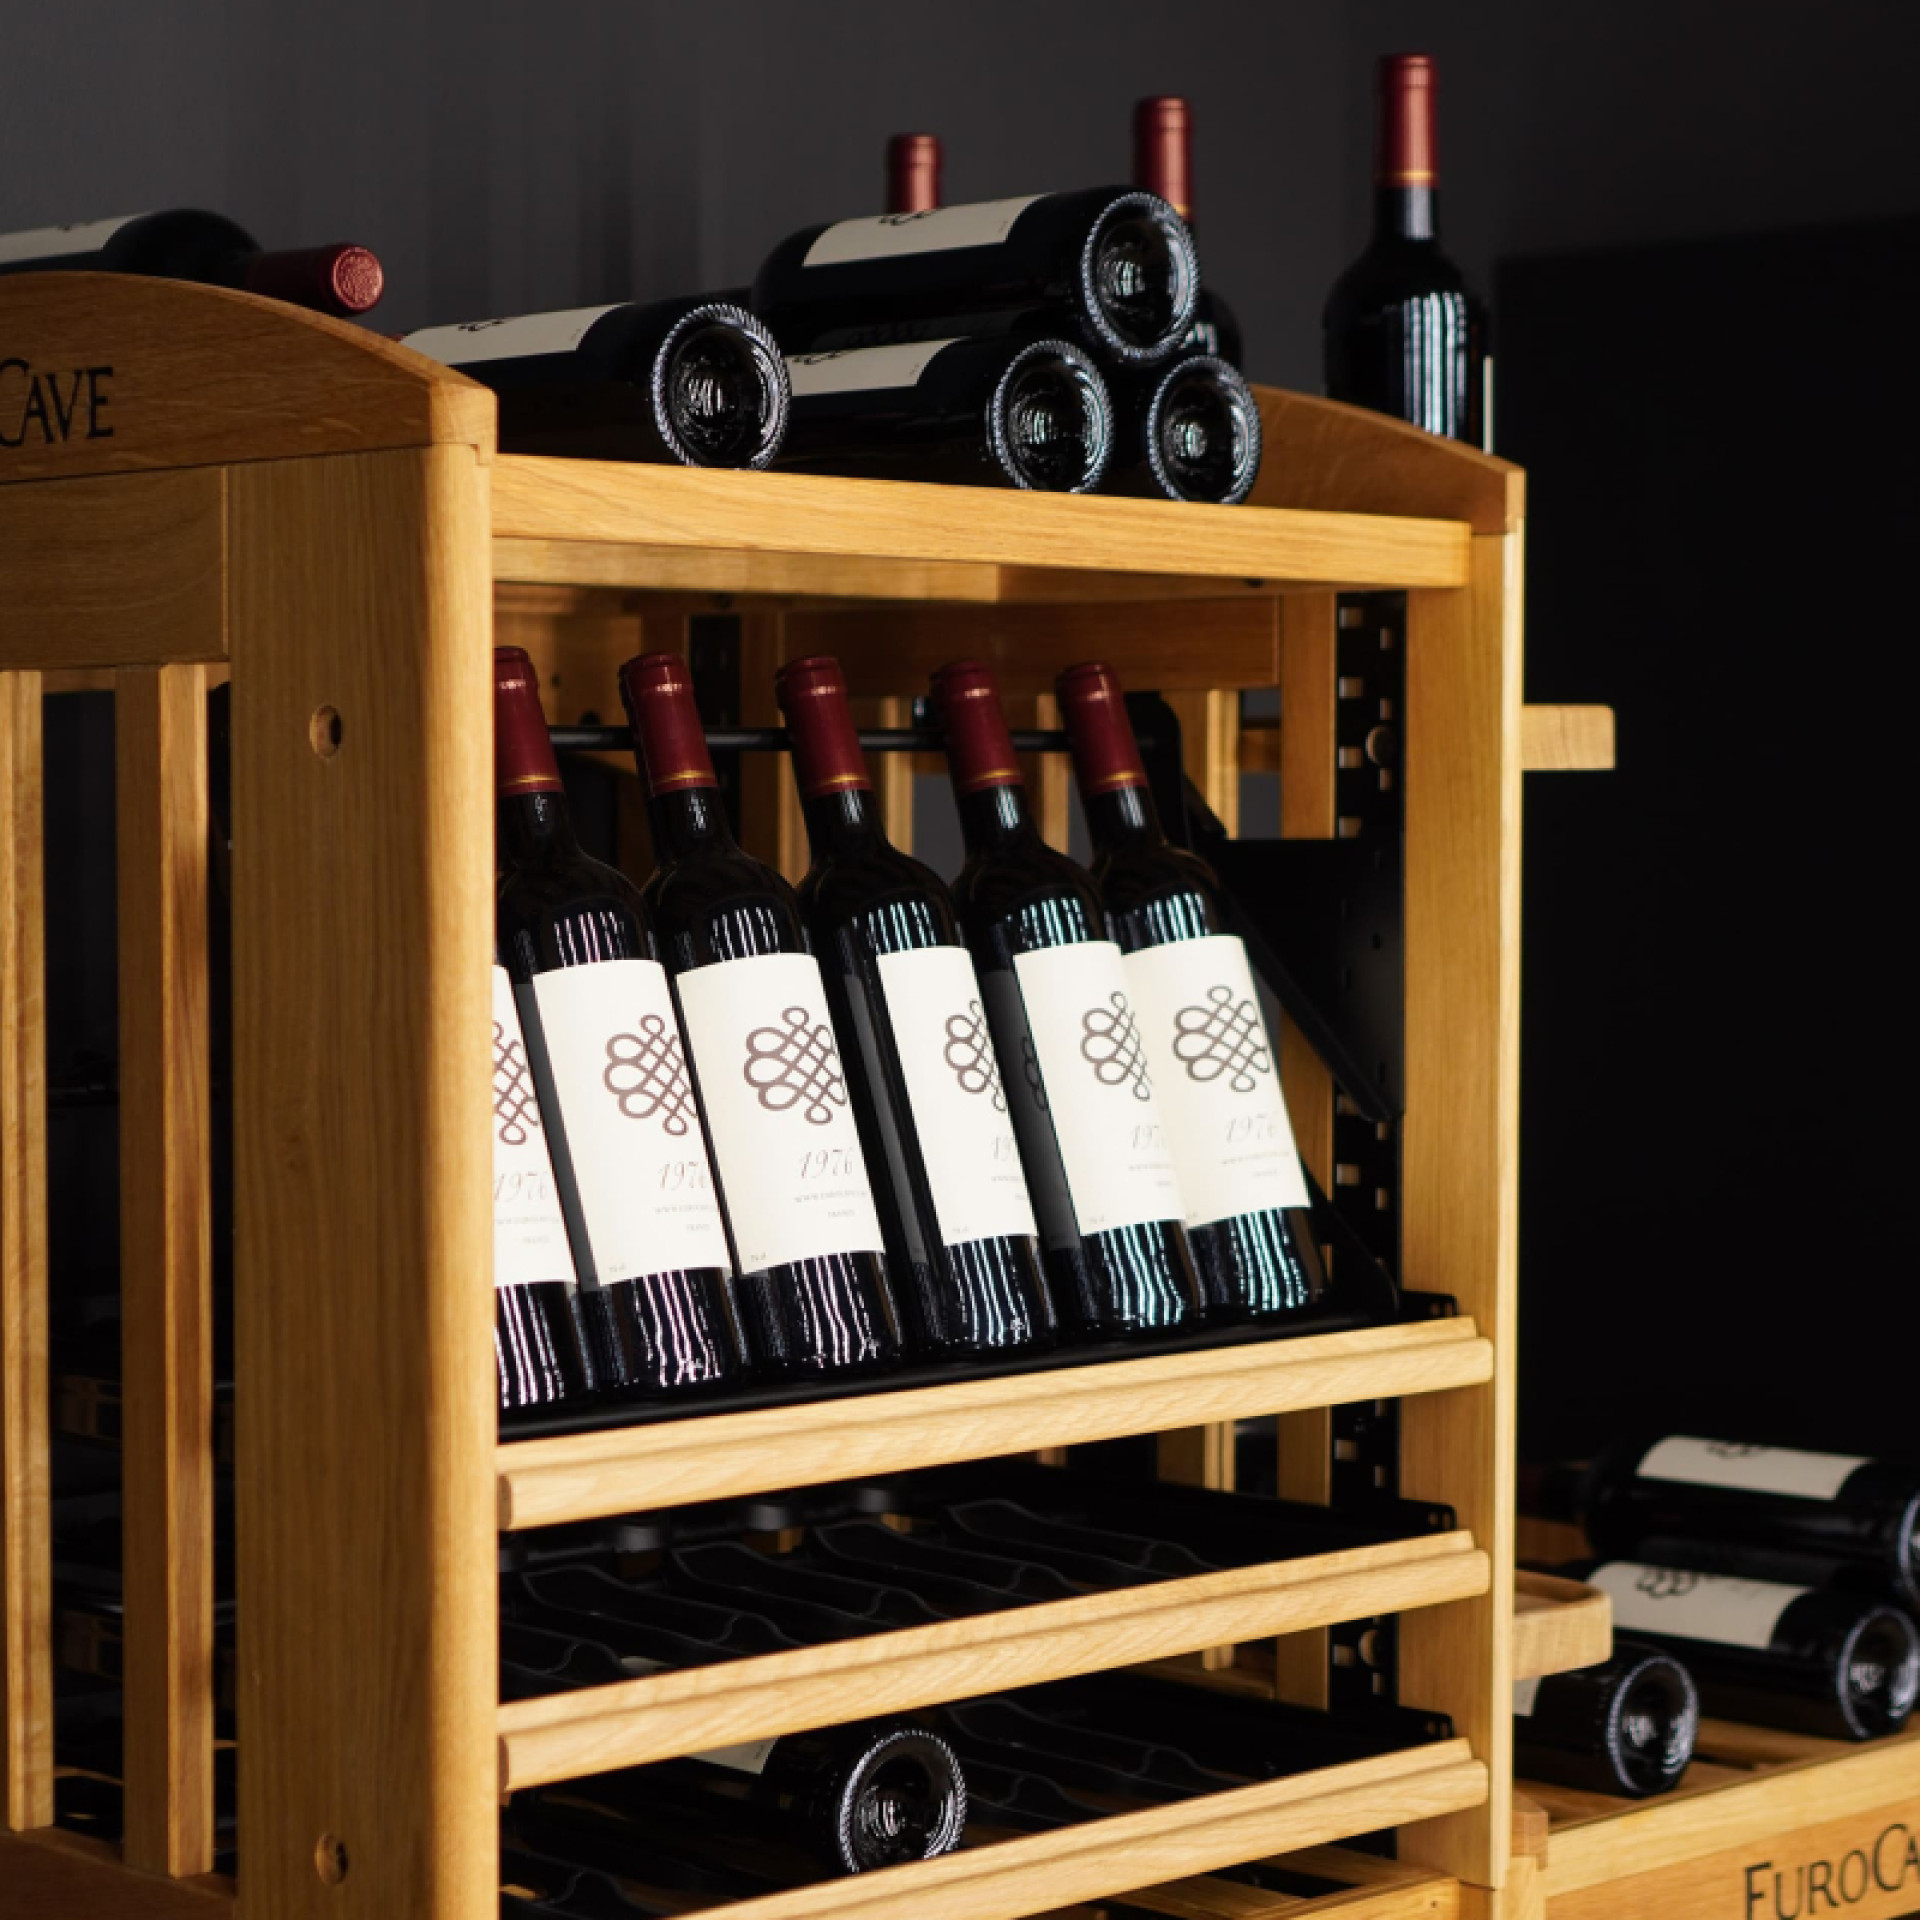 Articulated display mounted on a sliding shelf to clearly see your bottles and showcase them.